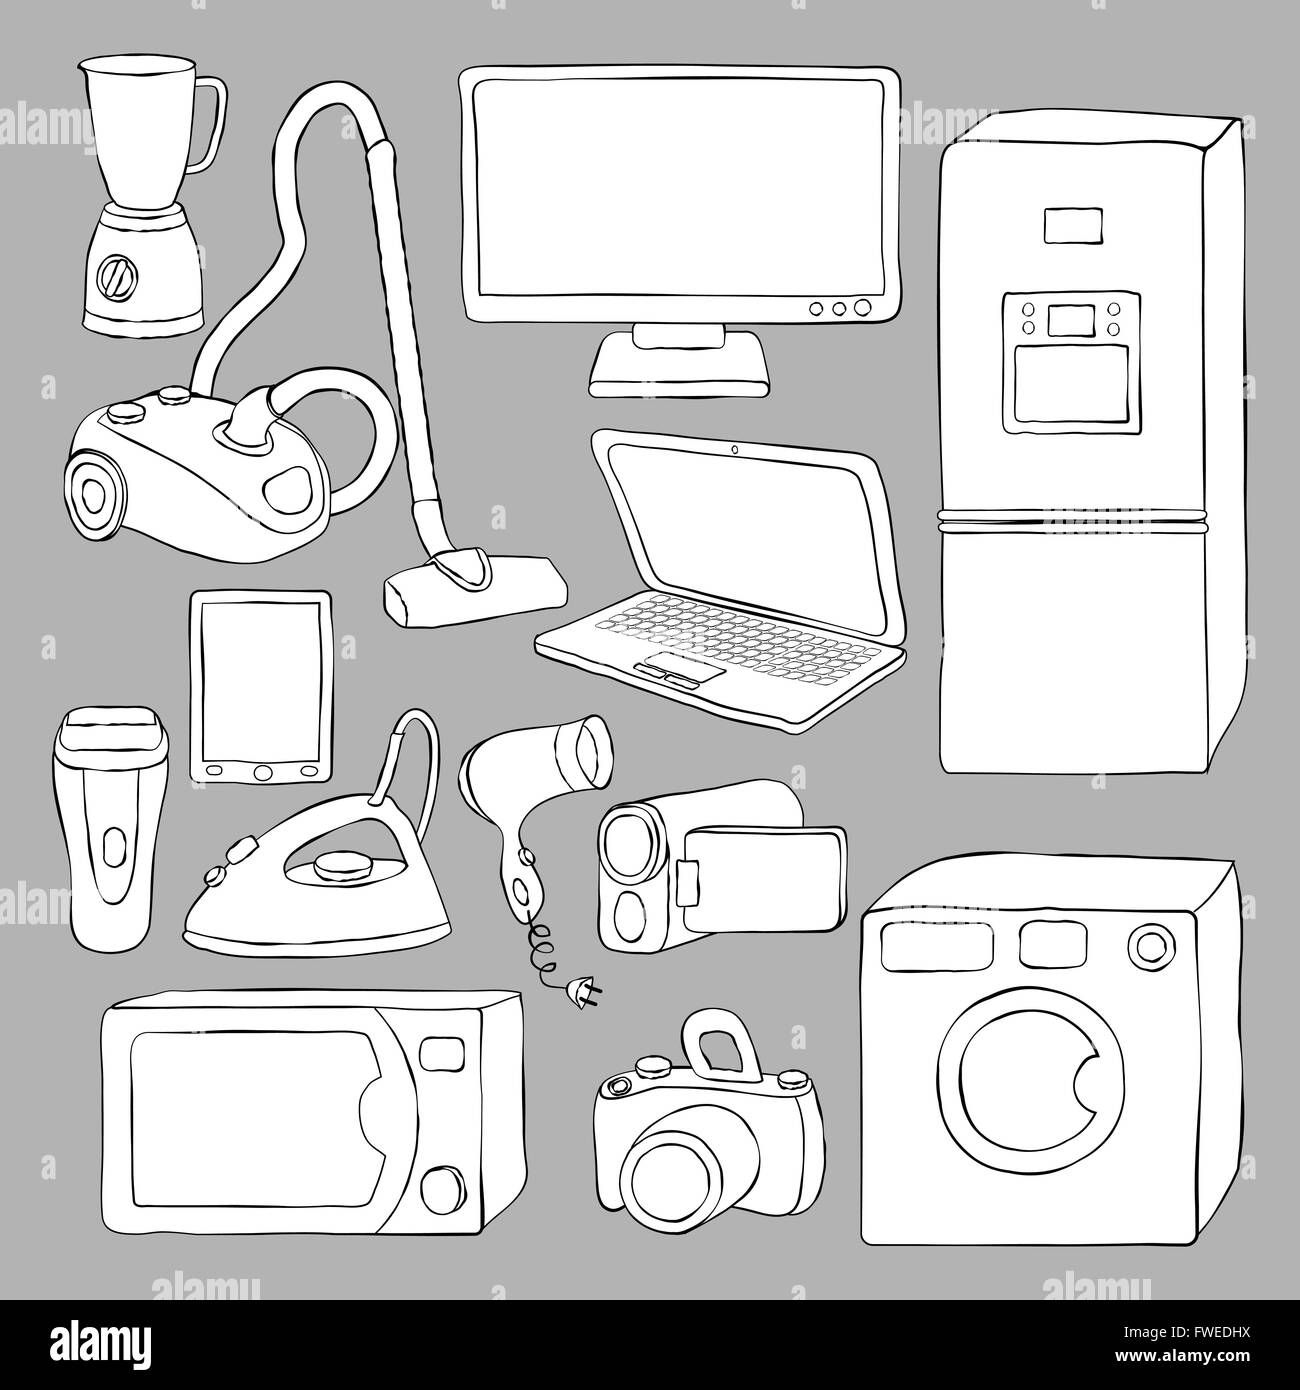 home appliances and electronics icons - vector illustration Stock Vector